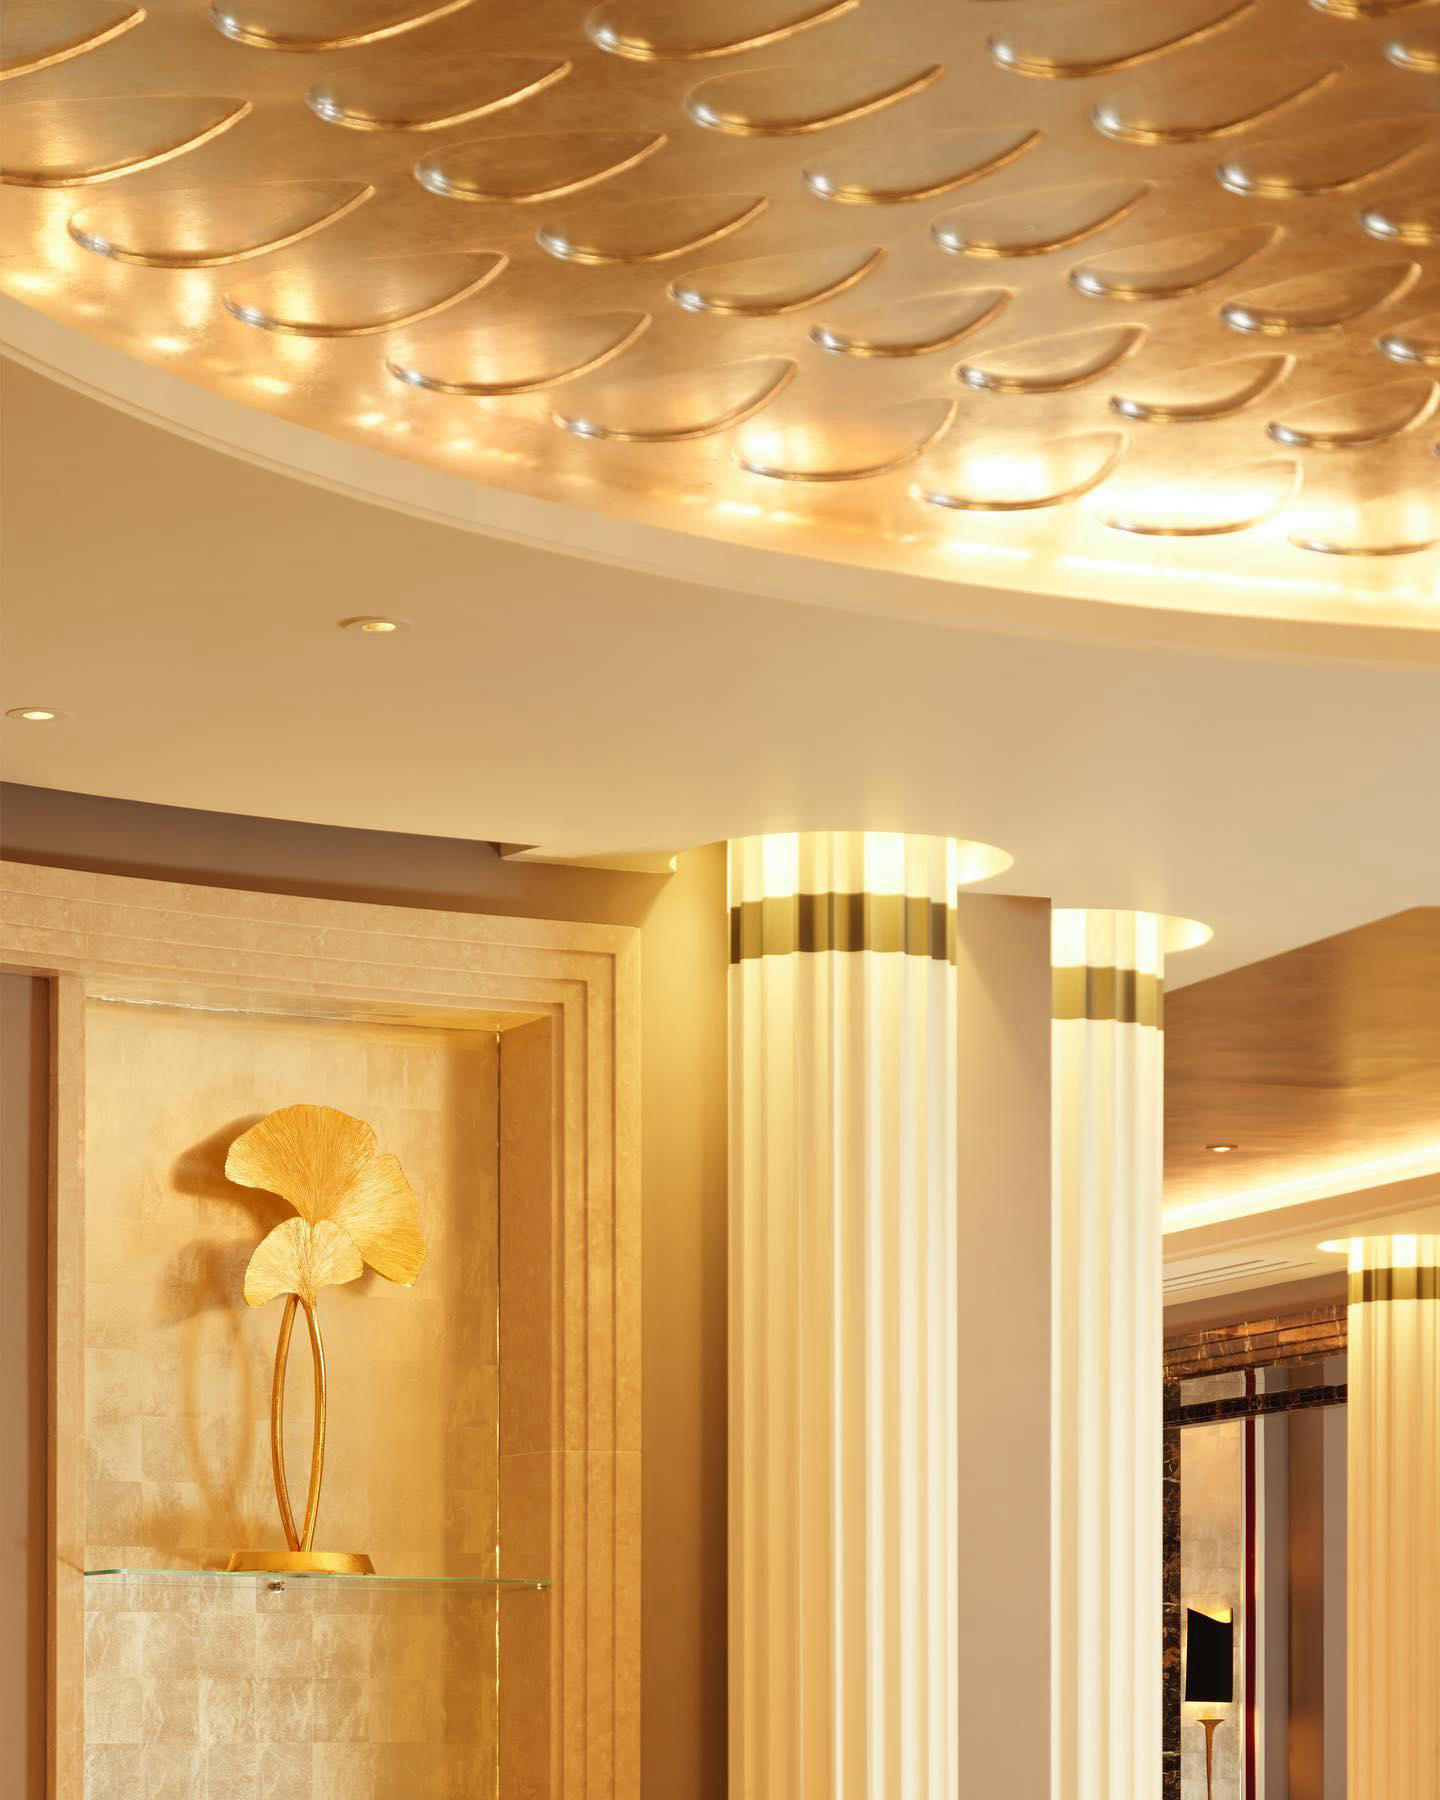 image  1 The Biltmore Mayfair - The elegant details throughout our lobby include this stunning, gold Ginkgo L